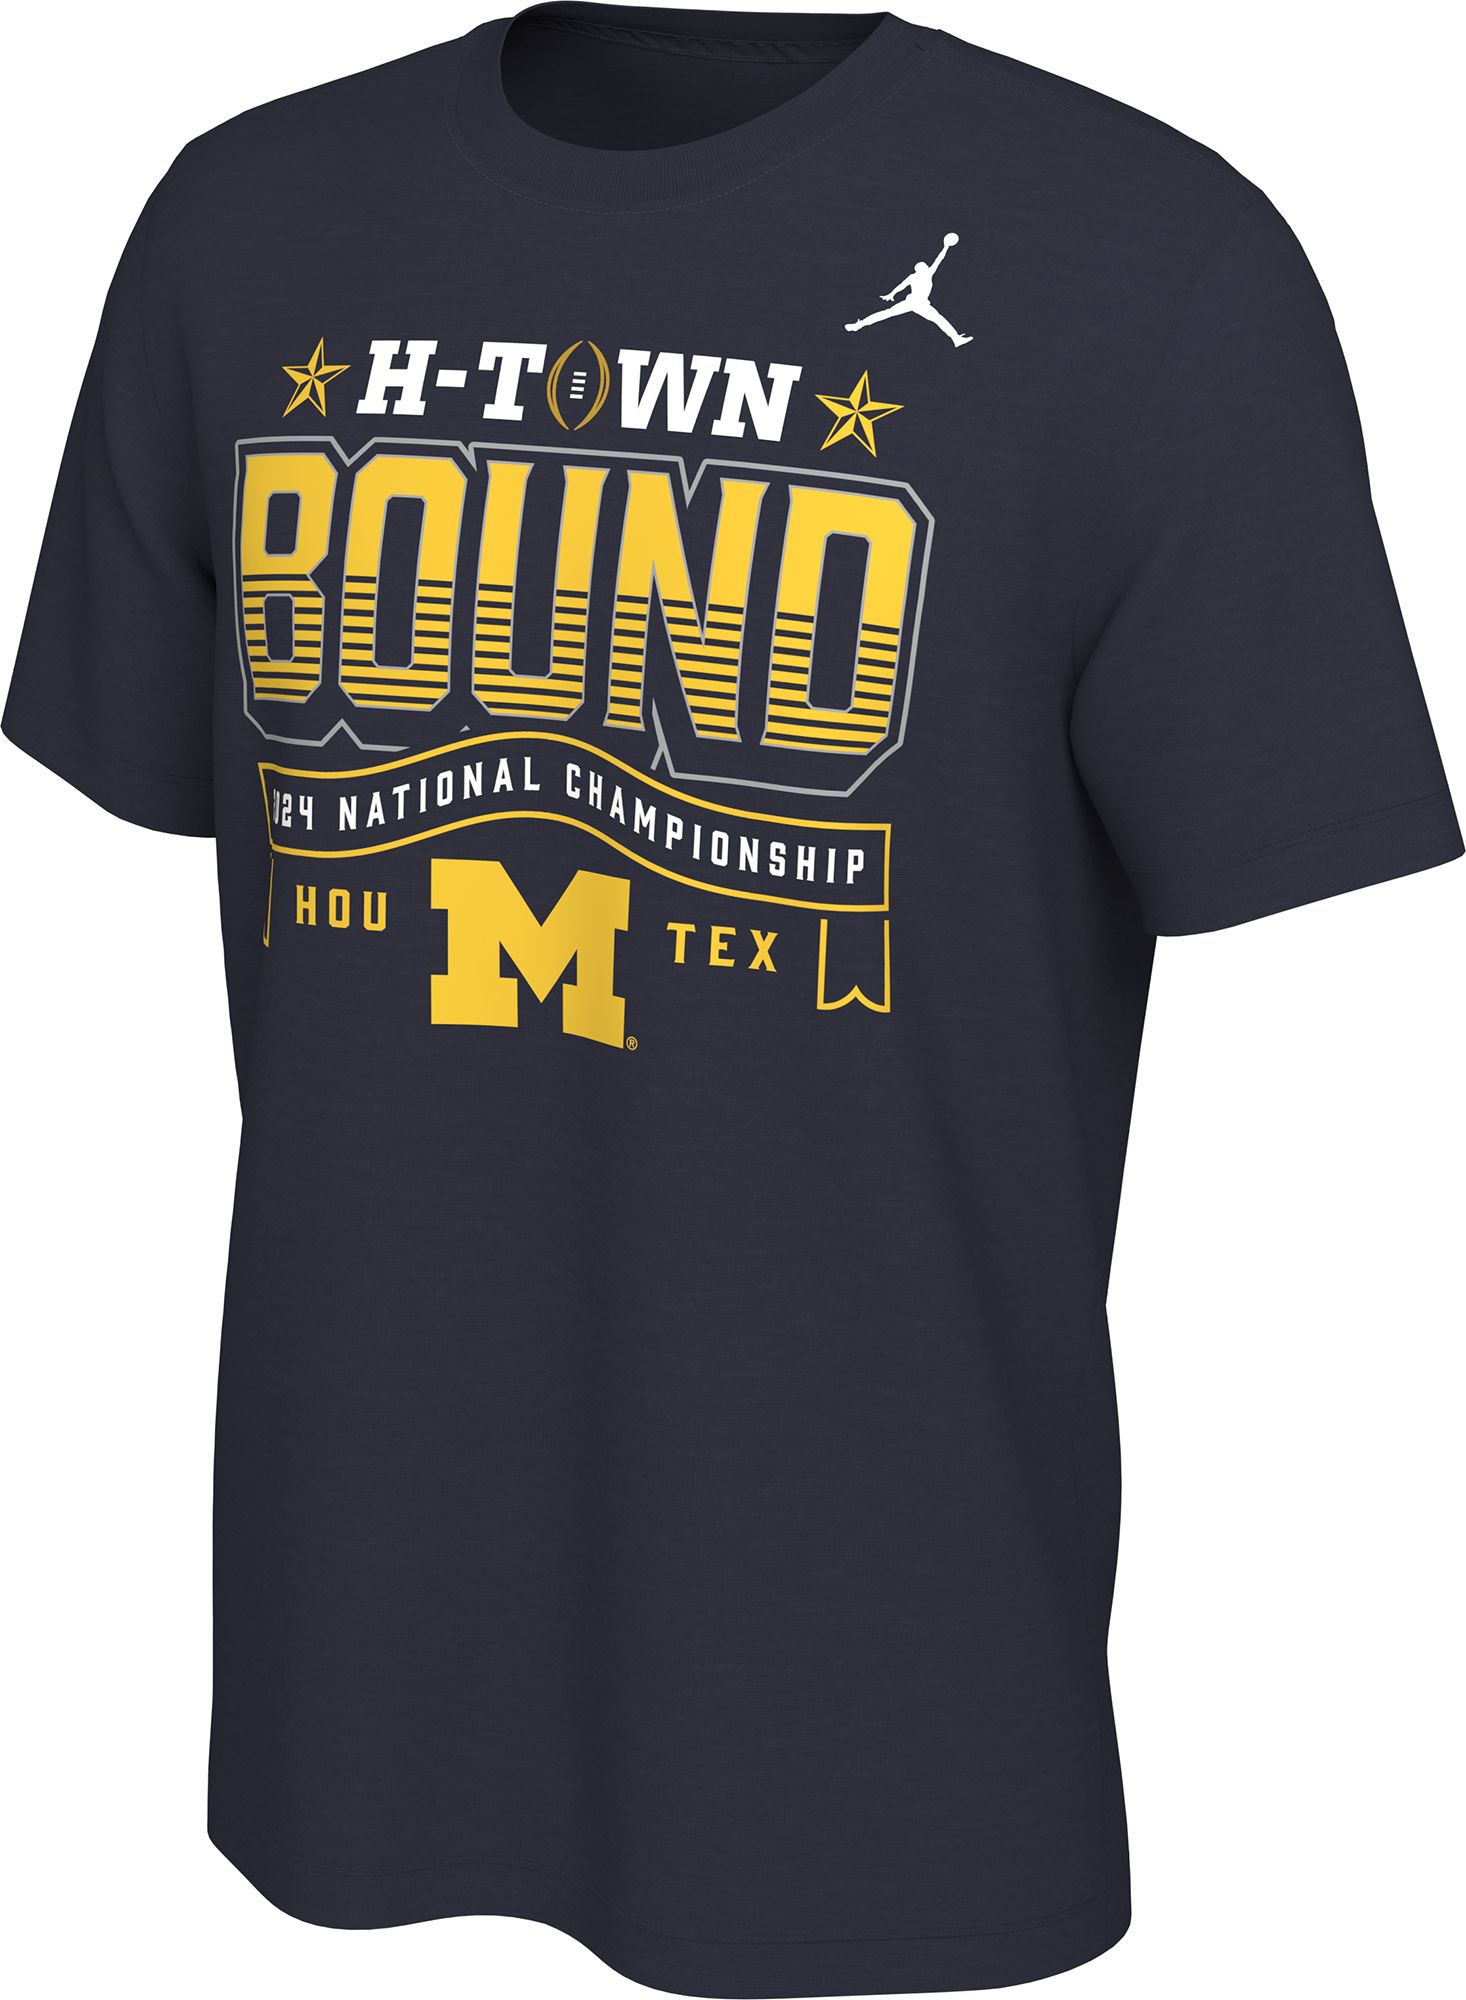 Michigan Wolverines Final Four jersey